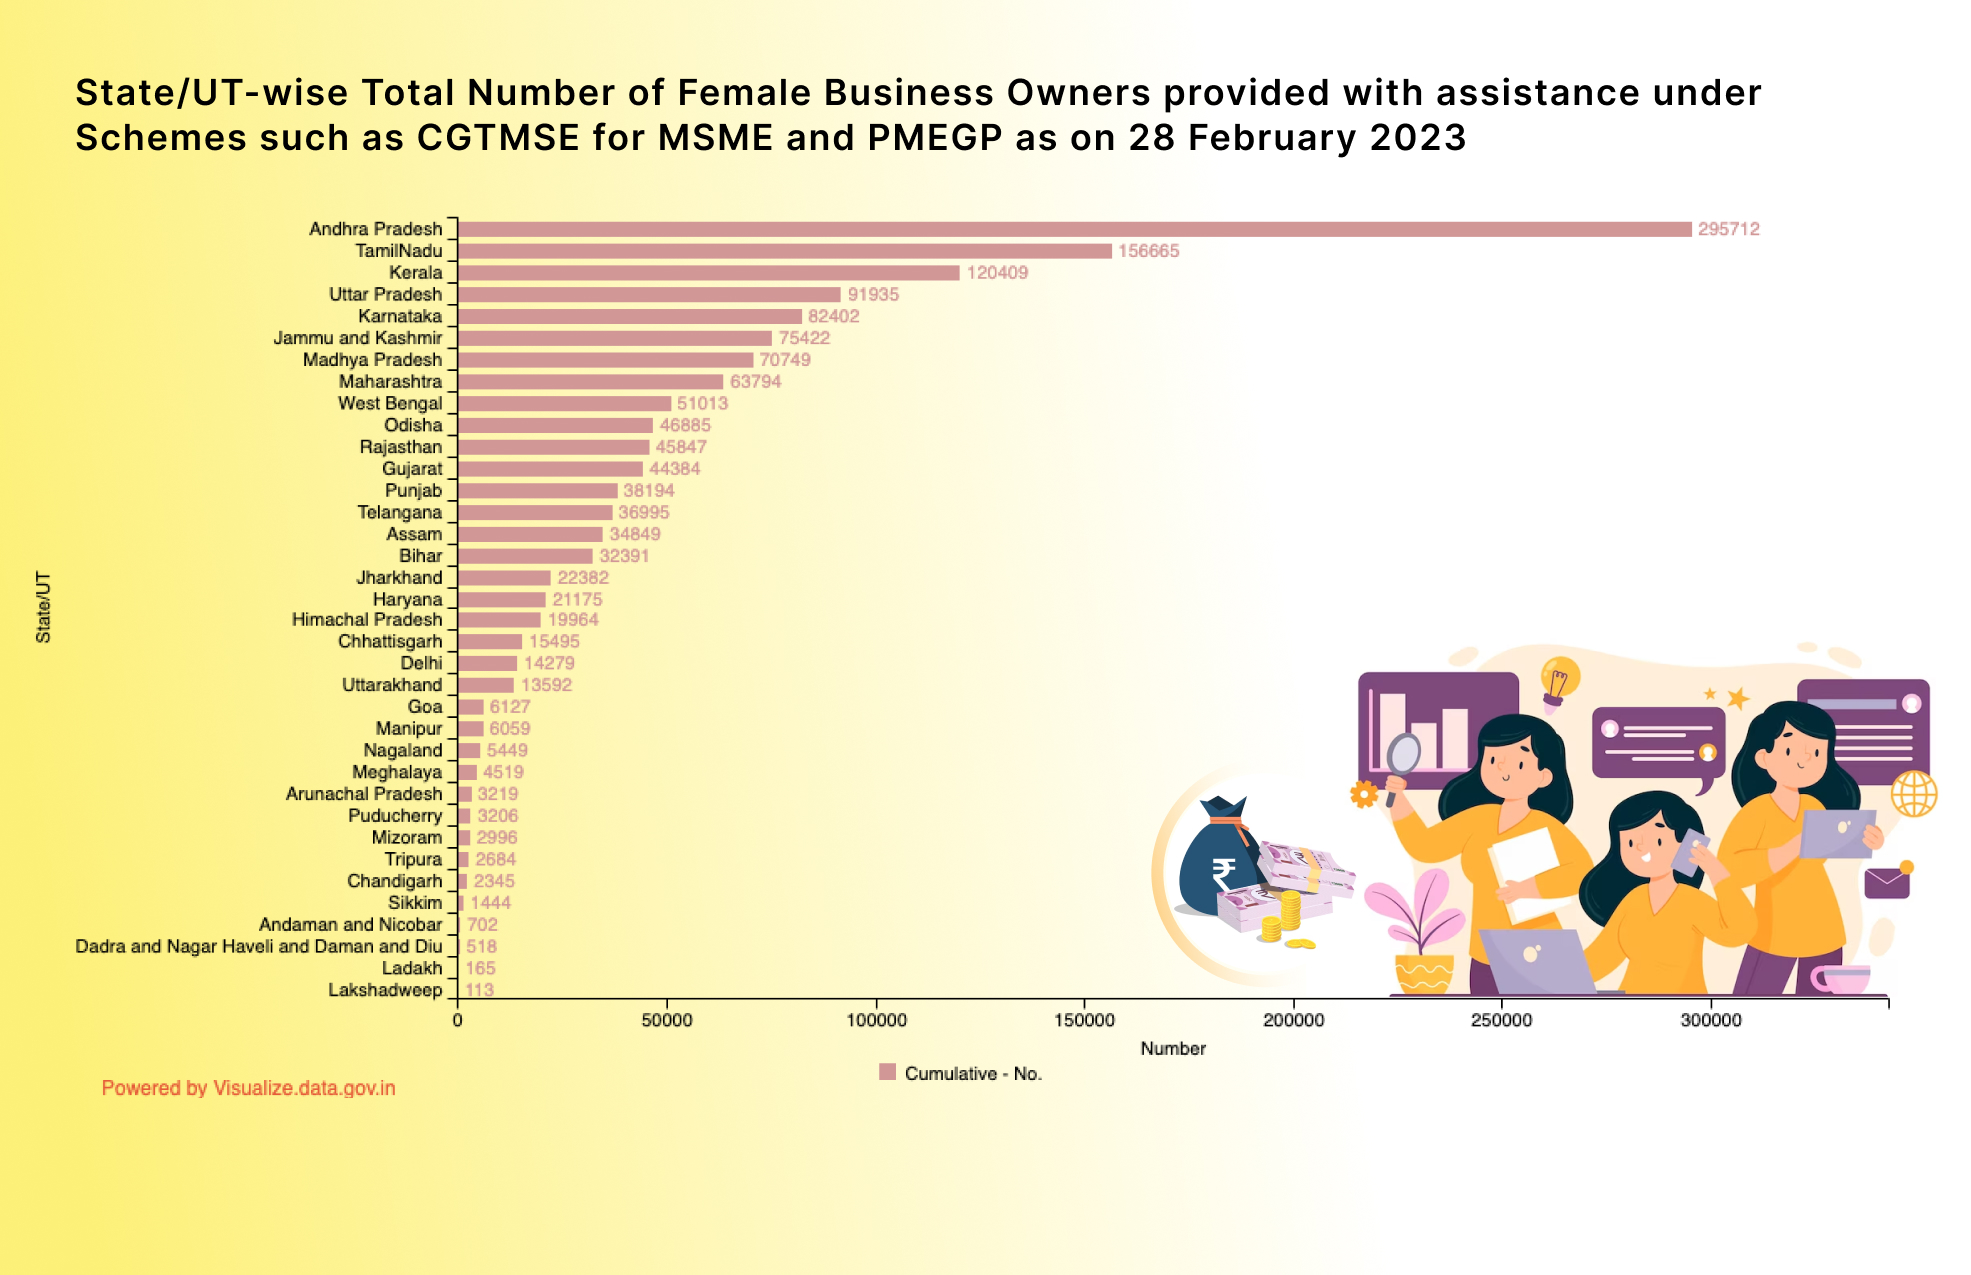 Banner of State/UT-wise Total Number of Female Business Owners provided with assistance under Schemes such as CGTMSE for MSME and PMEGP as on 28 February 2023